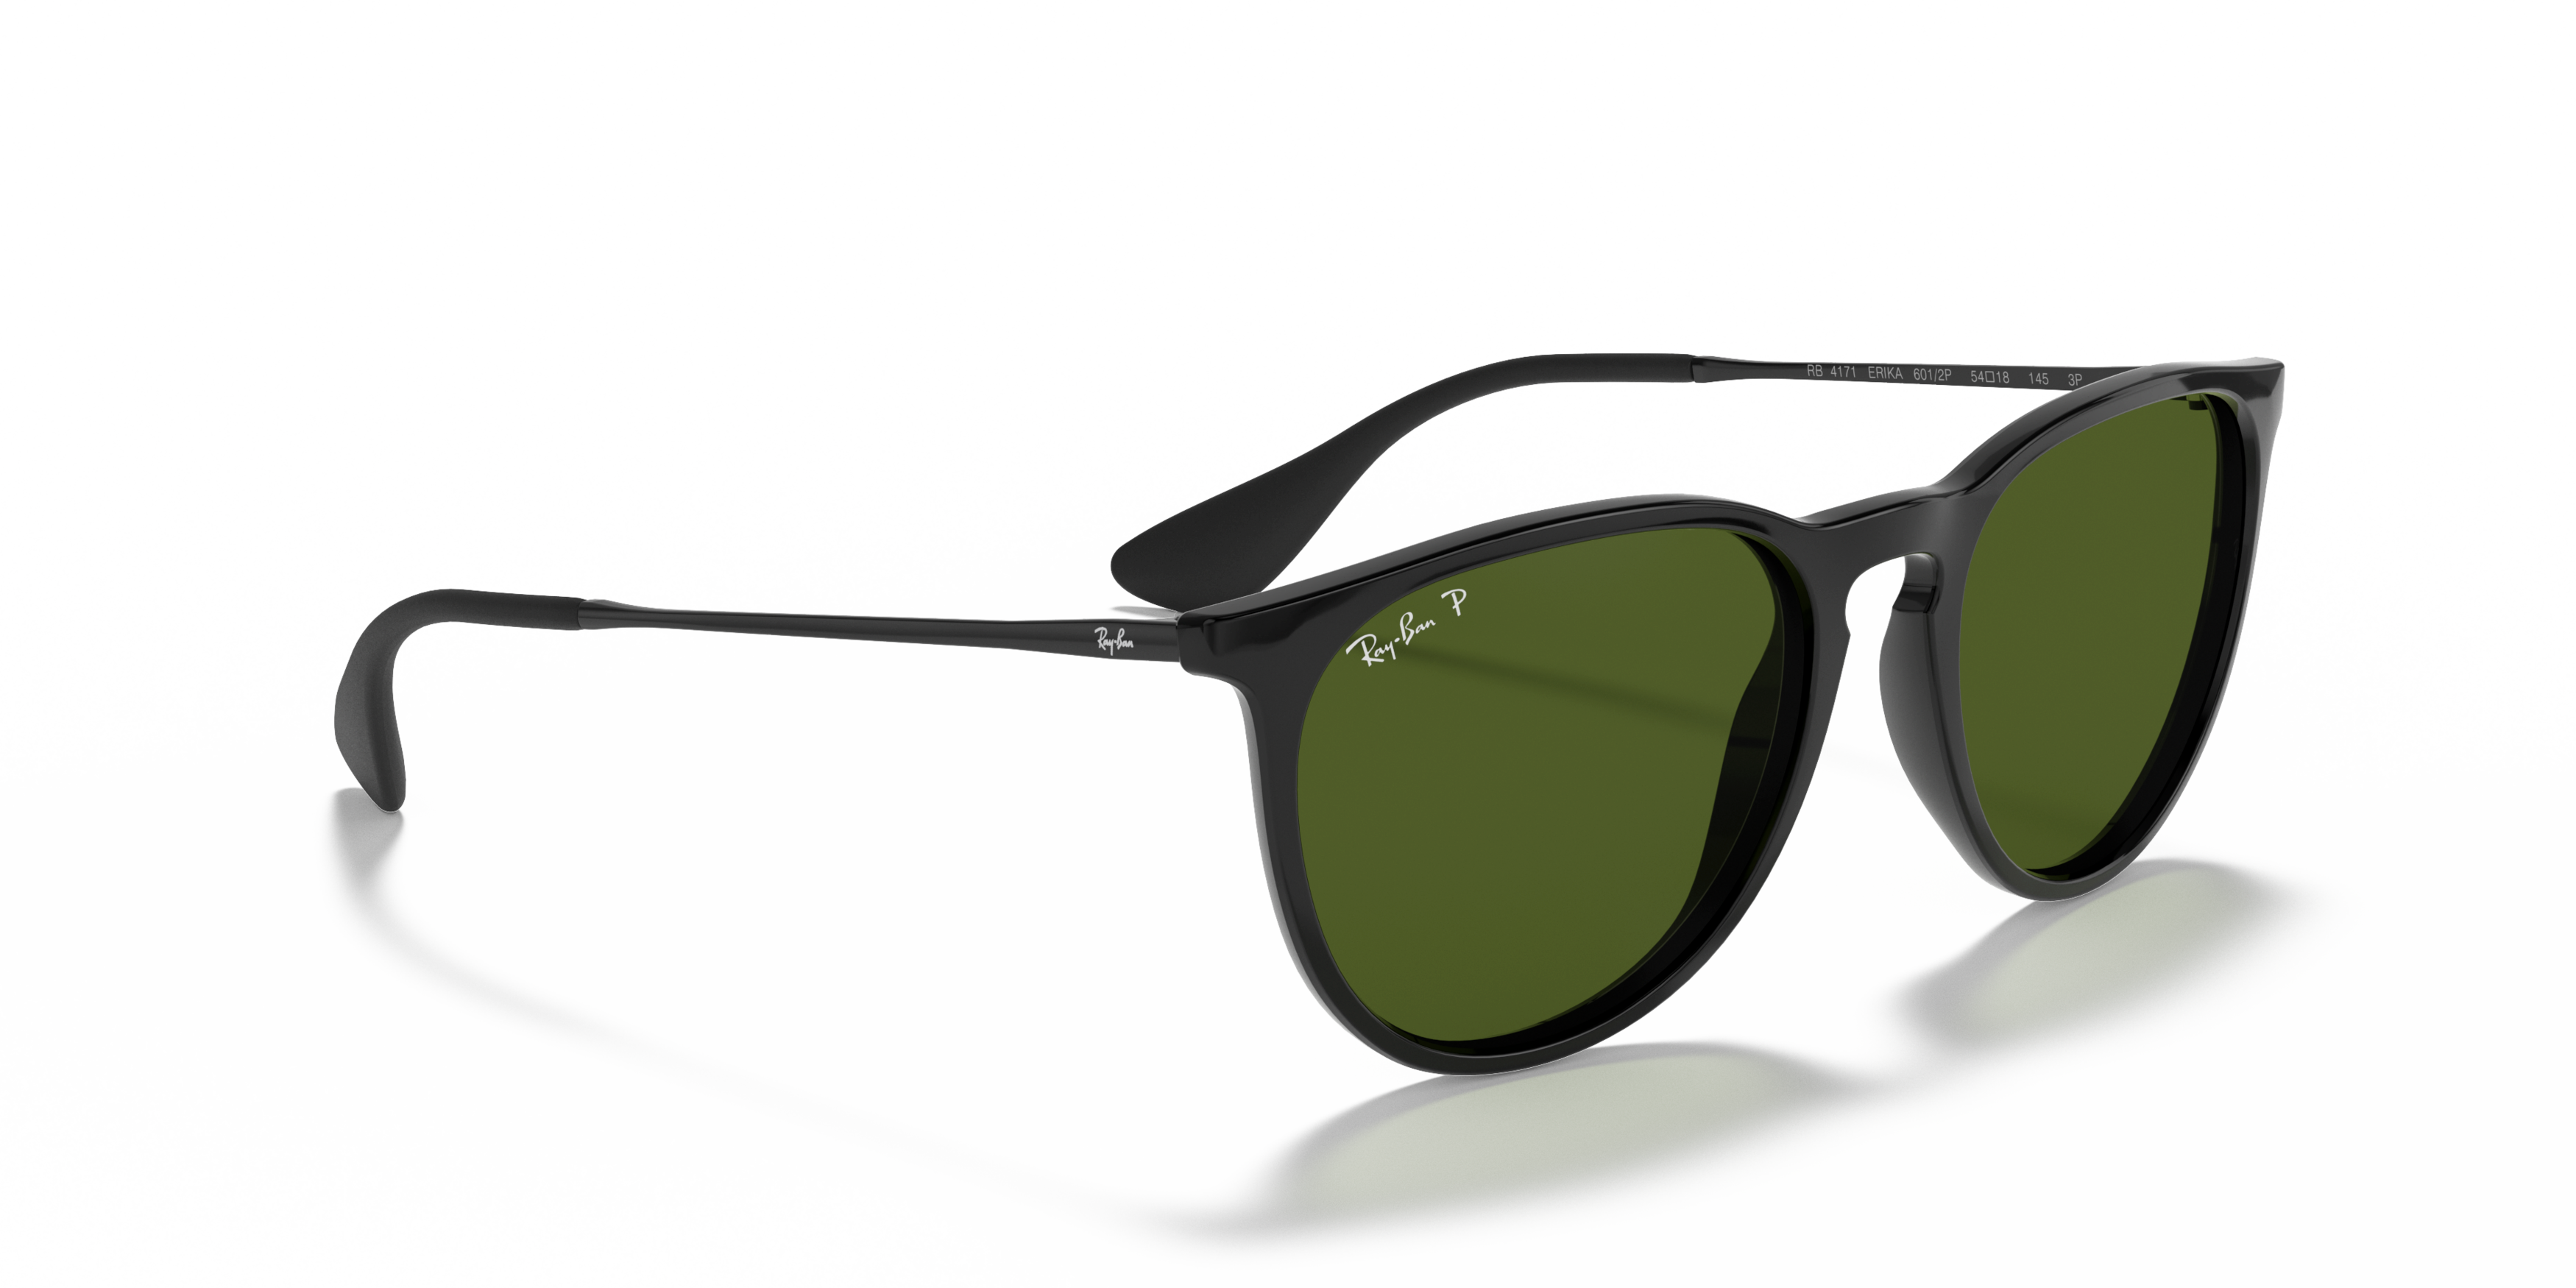 Angle_Right01 Ray Ban Erika 0RB4171 601/2P Verde / Negro